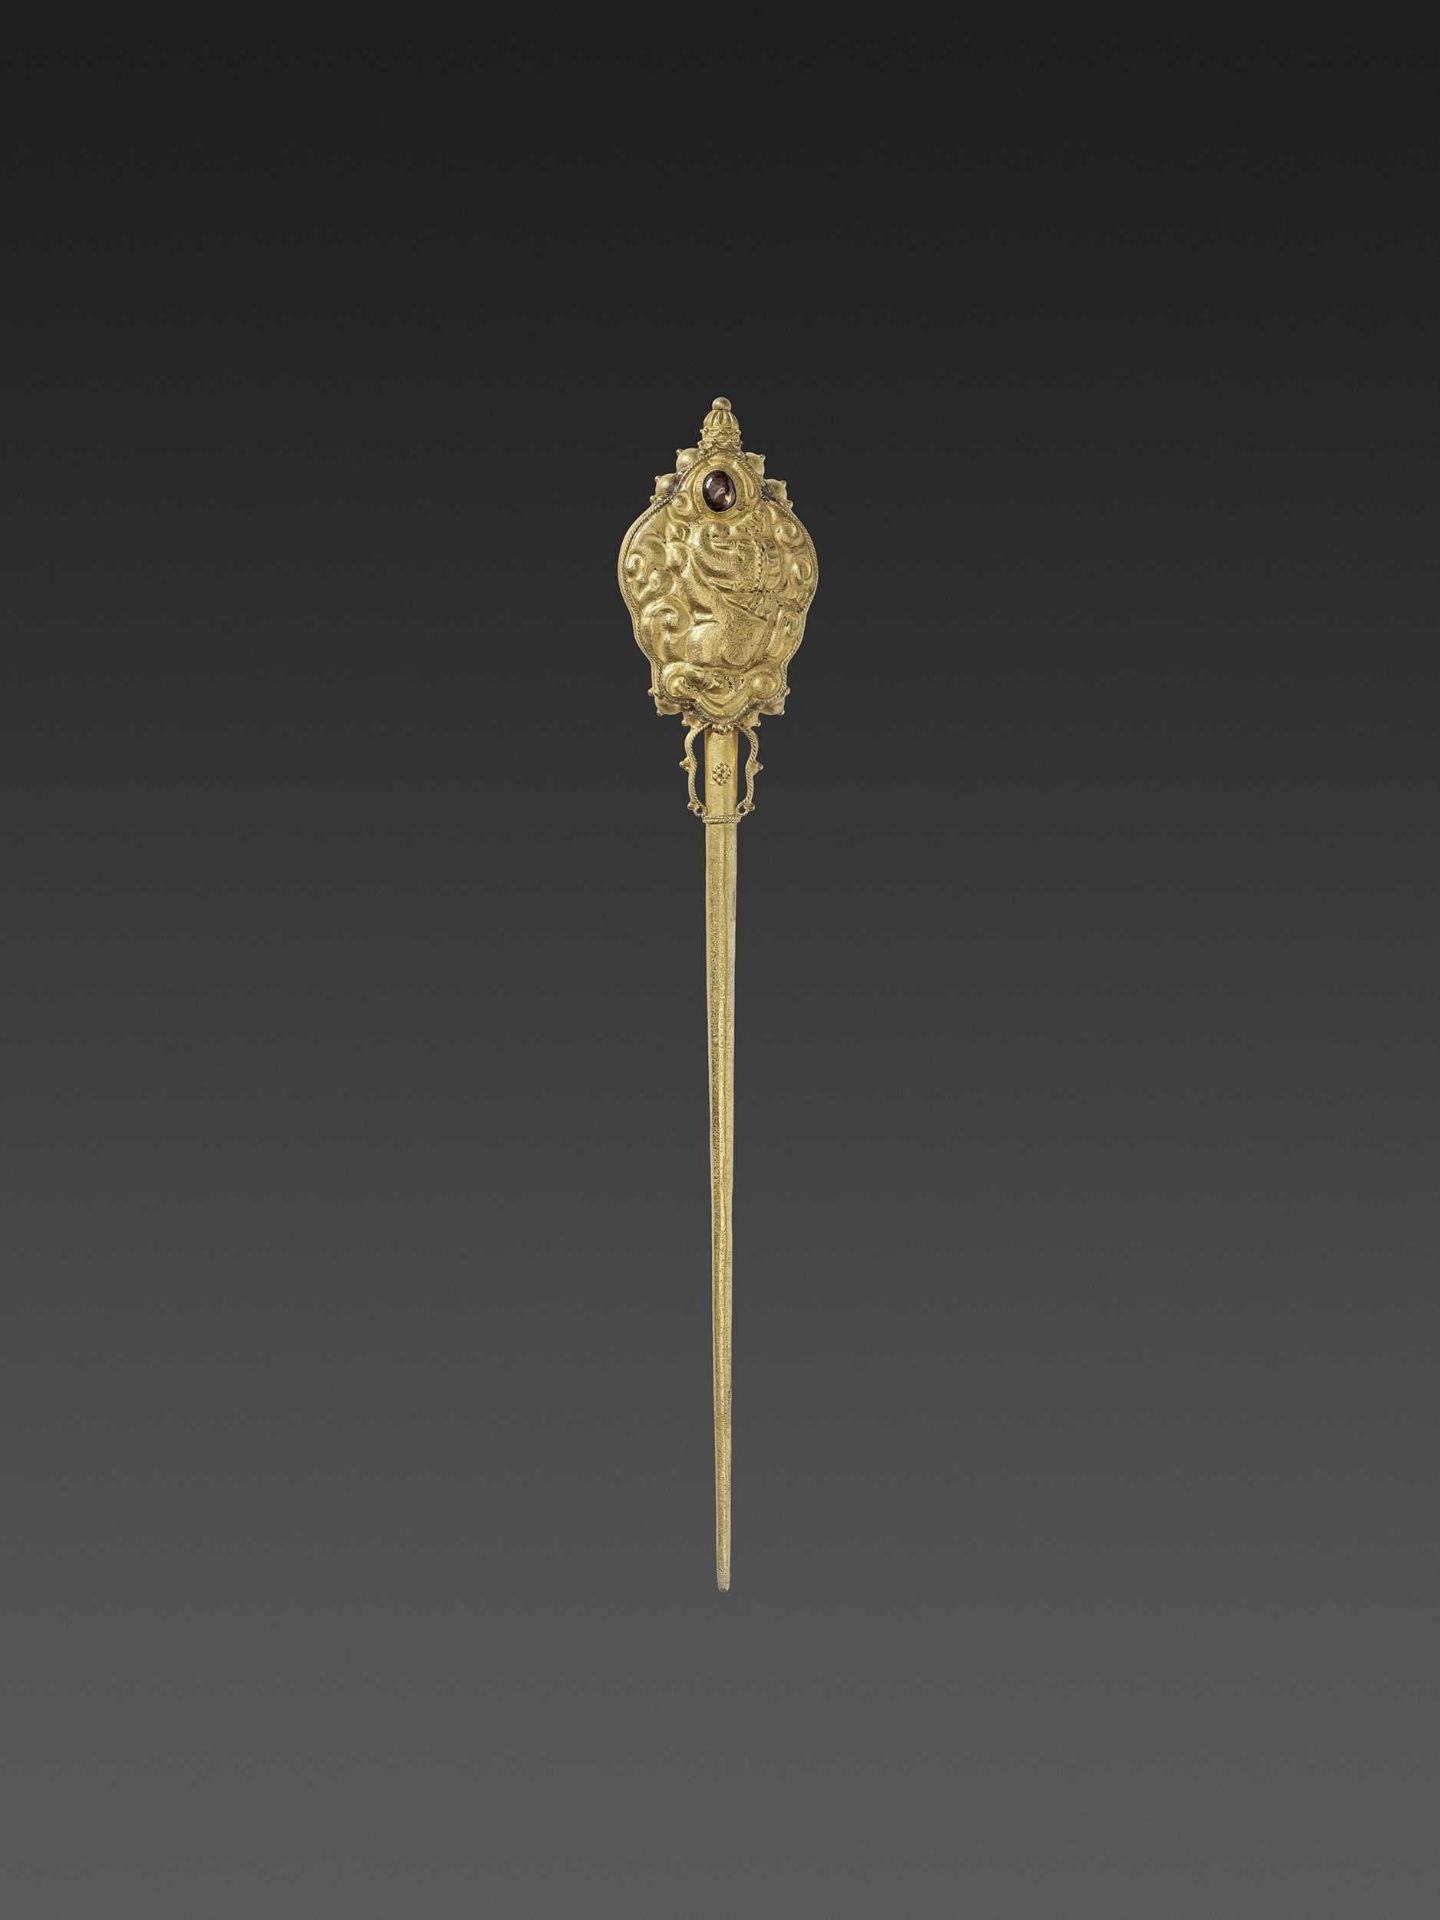 A CHAM GEMSTONE-SET GOLD REPOUSSÉ HAIRPIN WITH RECUMBENT ELEPHANTS